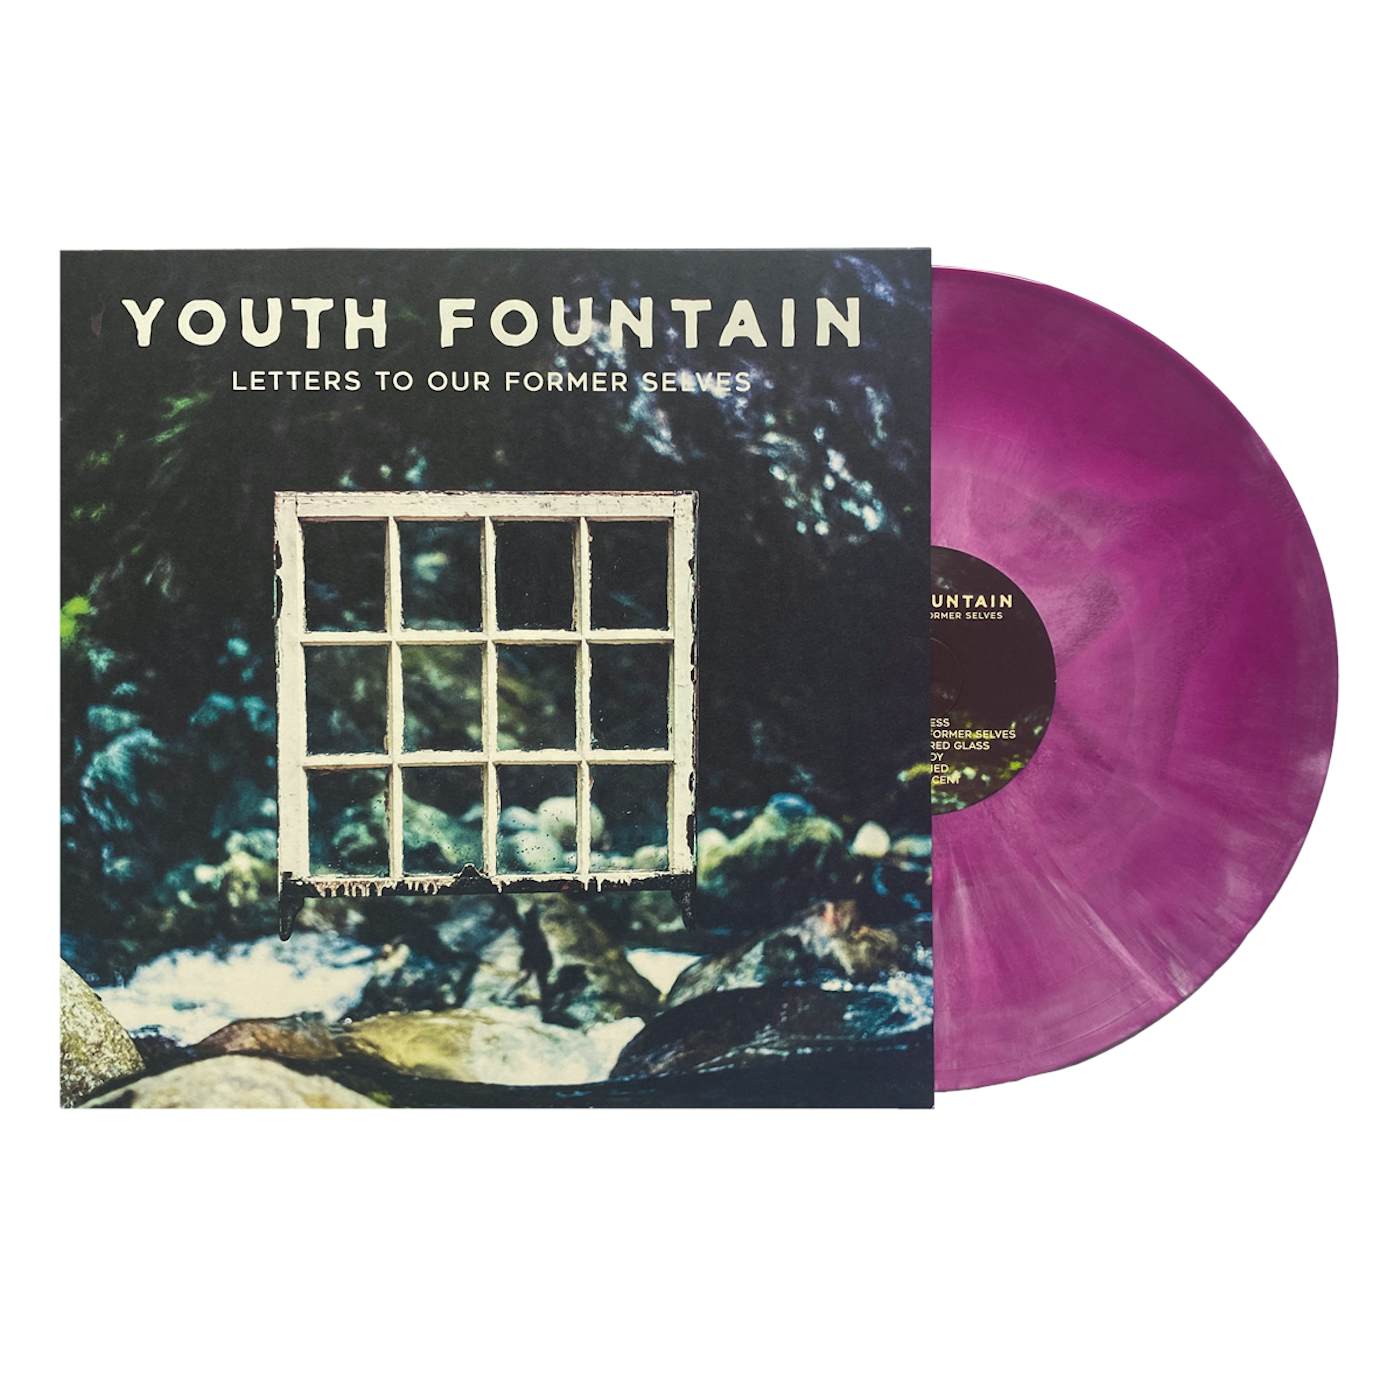 Youth Fountain Letters To Our Former Selves LP (Purple & White Galaxy Vinyl)